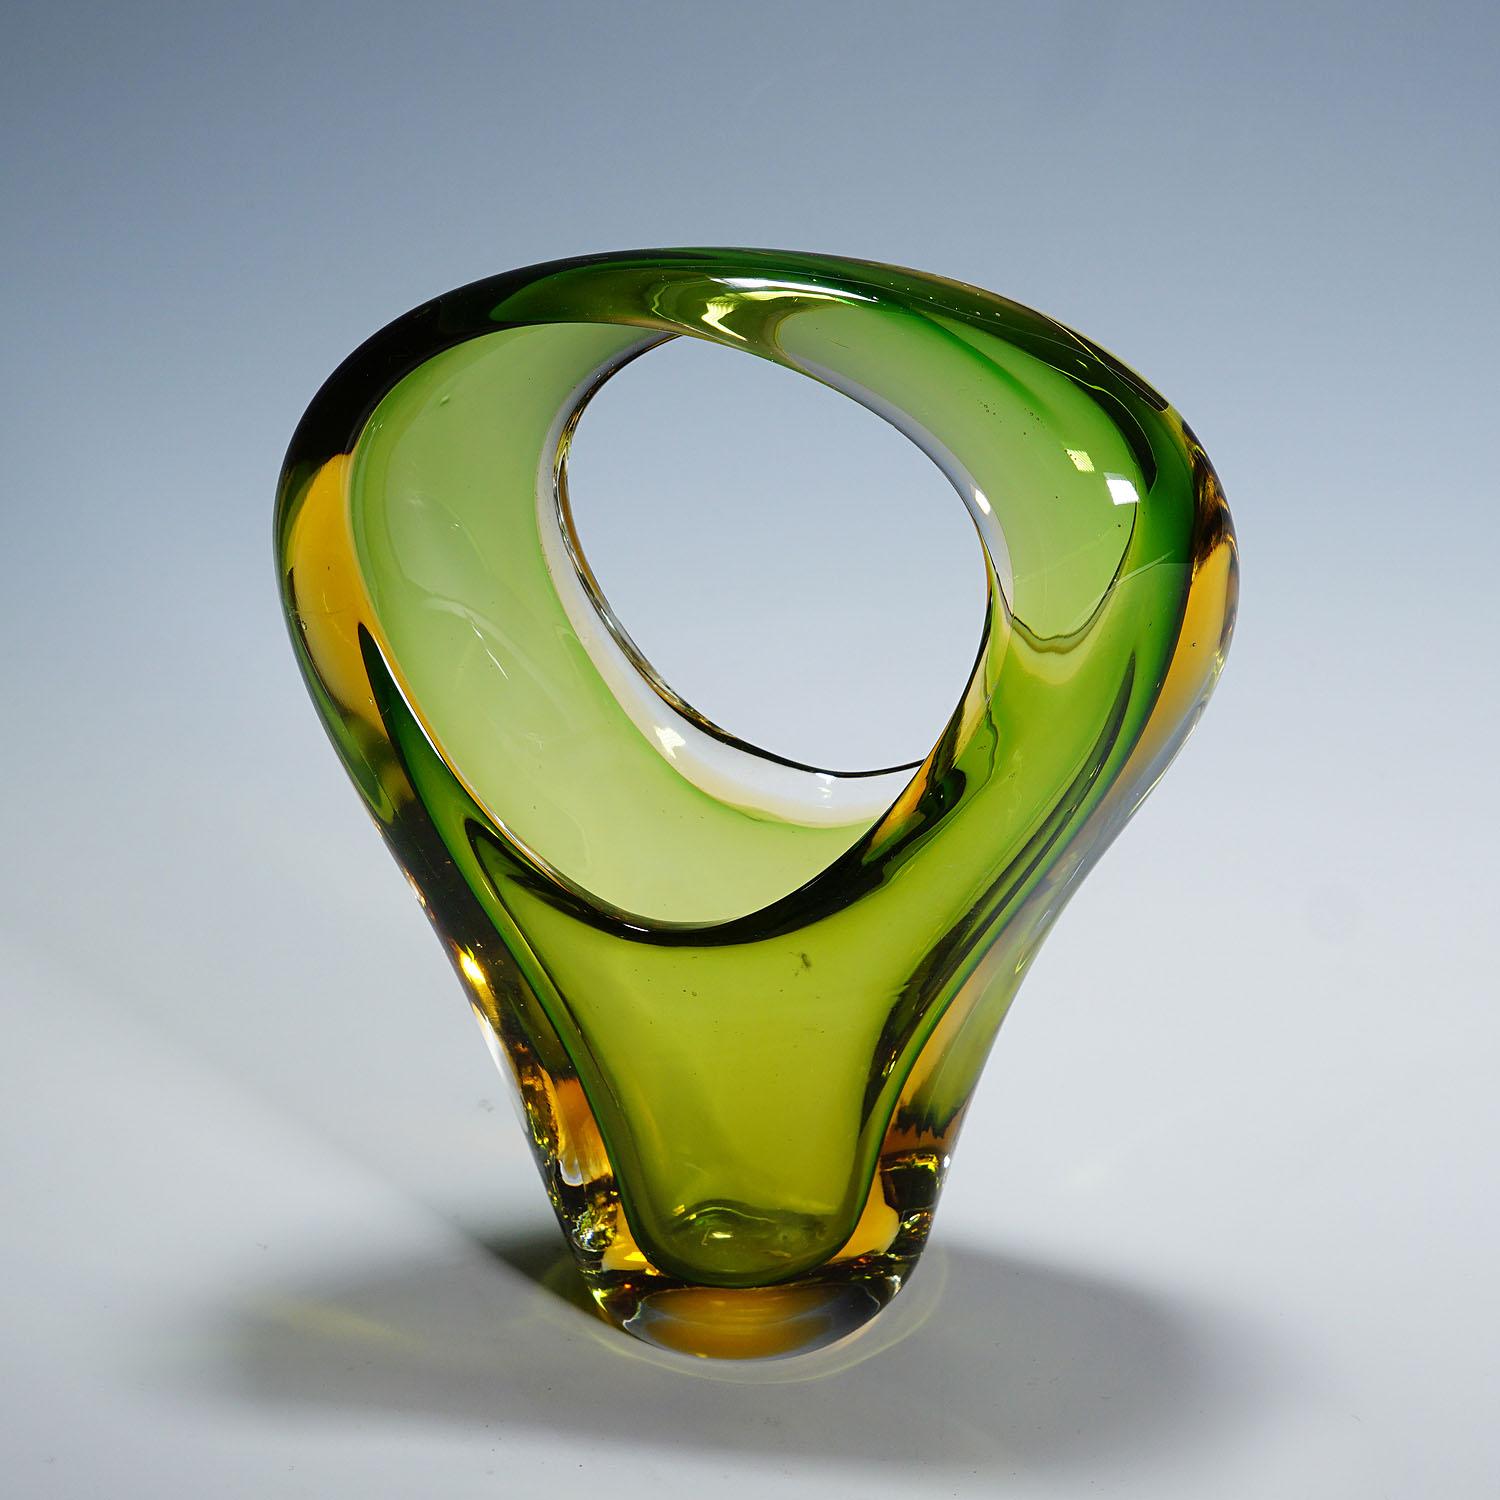 20th Century Archimede Seguso Sommerso Basket in Green and Amber, Murano Italy ca. 1950s